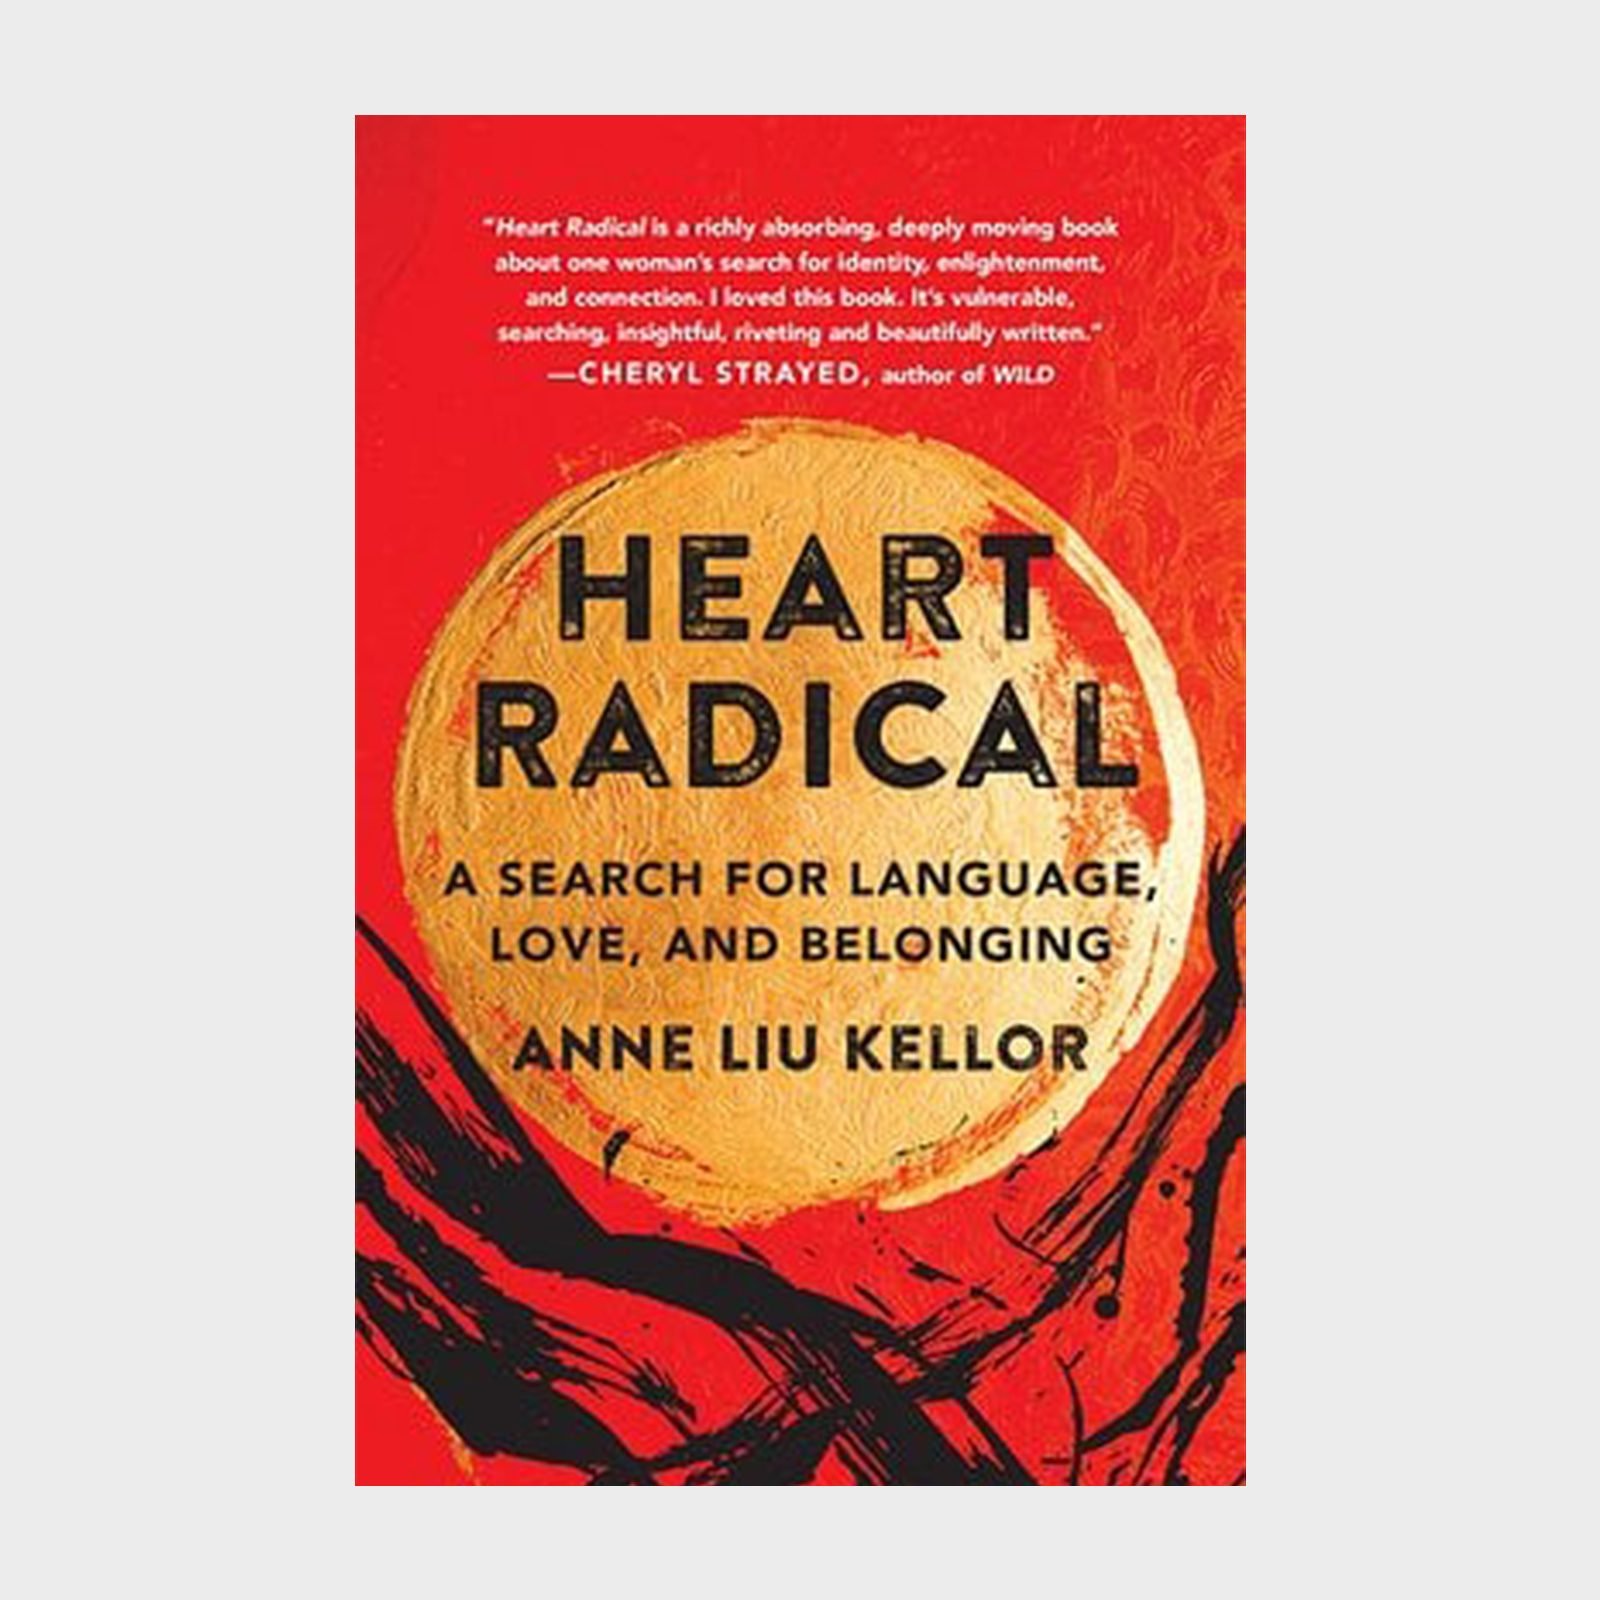 <p>One more for fans of first-person stories that teach self-help lessons: <em>Heart Radical</em> is at once a lyrical memoir and a lesson in journeys toward selfhood. Published in September 2021, it will resonate particularly for multilingual or multiracial readers. Kellor navigates between cultures, languages, and roles in this story of discovery and belonging. Her journey encourages readers to find their own paths rather than try to fit what others expect of them. Sometimes the best self-help books are the ones that don't intend to fit the genre at all. Such is the case with <em>Heart Radical</em>, which is beautifully written, honestly told, and immensely helpful.</p> <p class="listicle-page__cta-button-shop"><a class="shop-btn" href="https://bookshop.org/books/heart-radical-a-search-for-language-love-and-belonging/9781647421731">Shop Now</a></p>